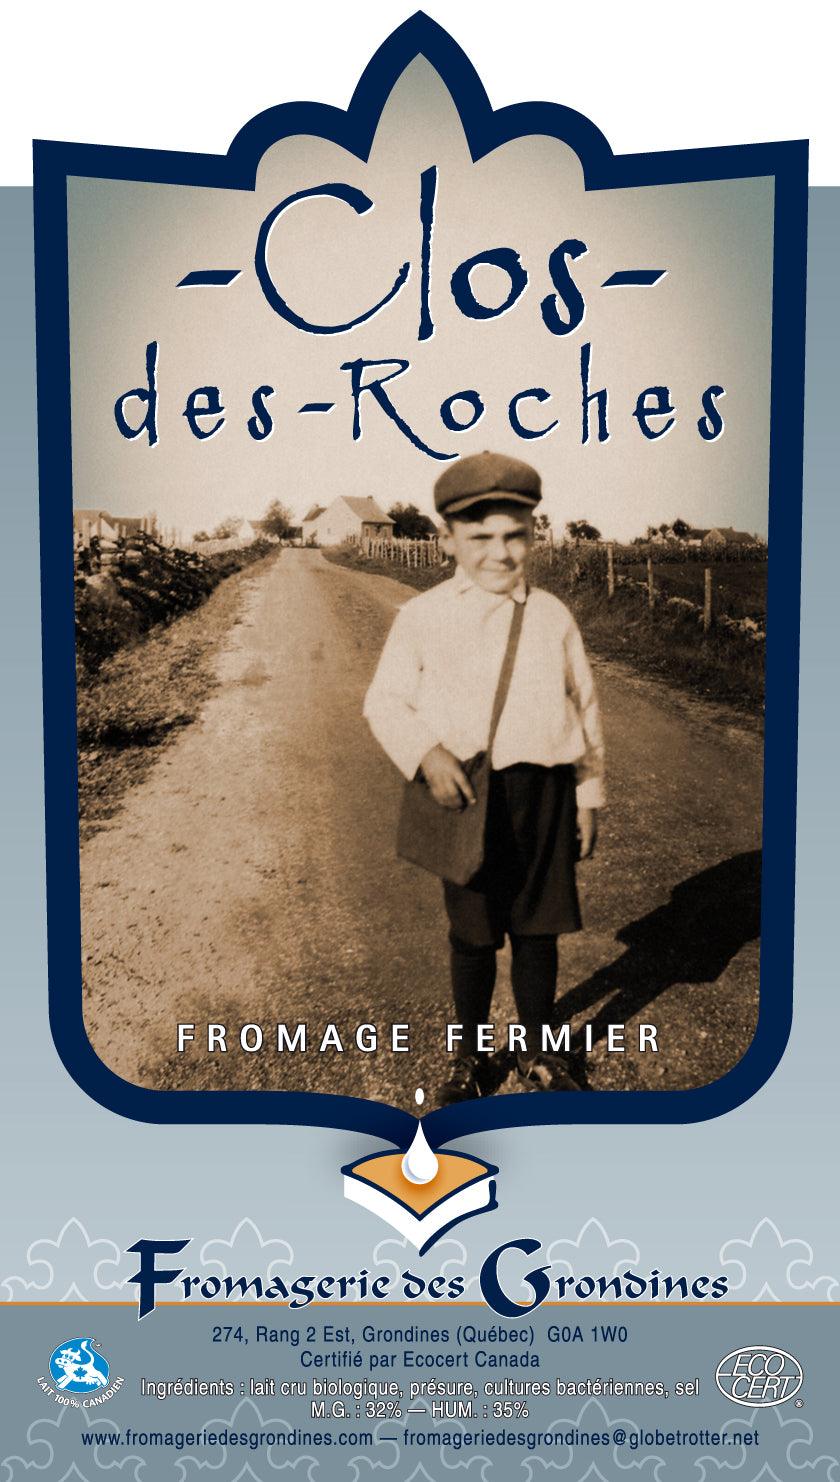 Clos-des-Roches - Fromagerie des Grondines